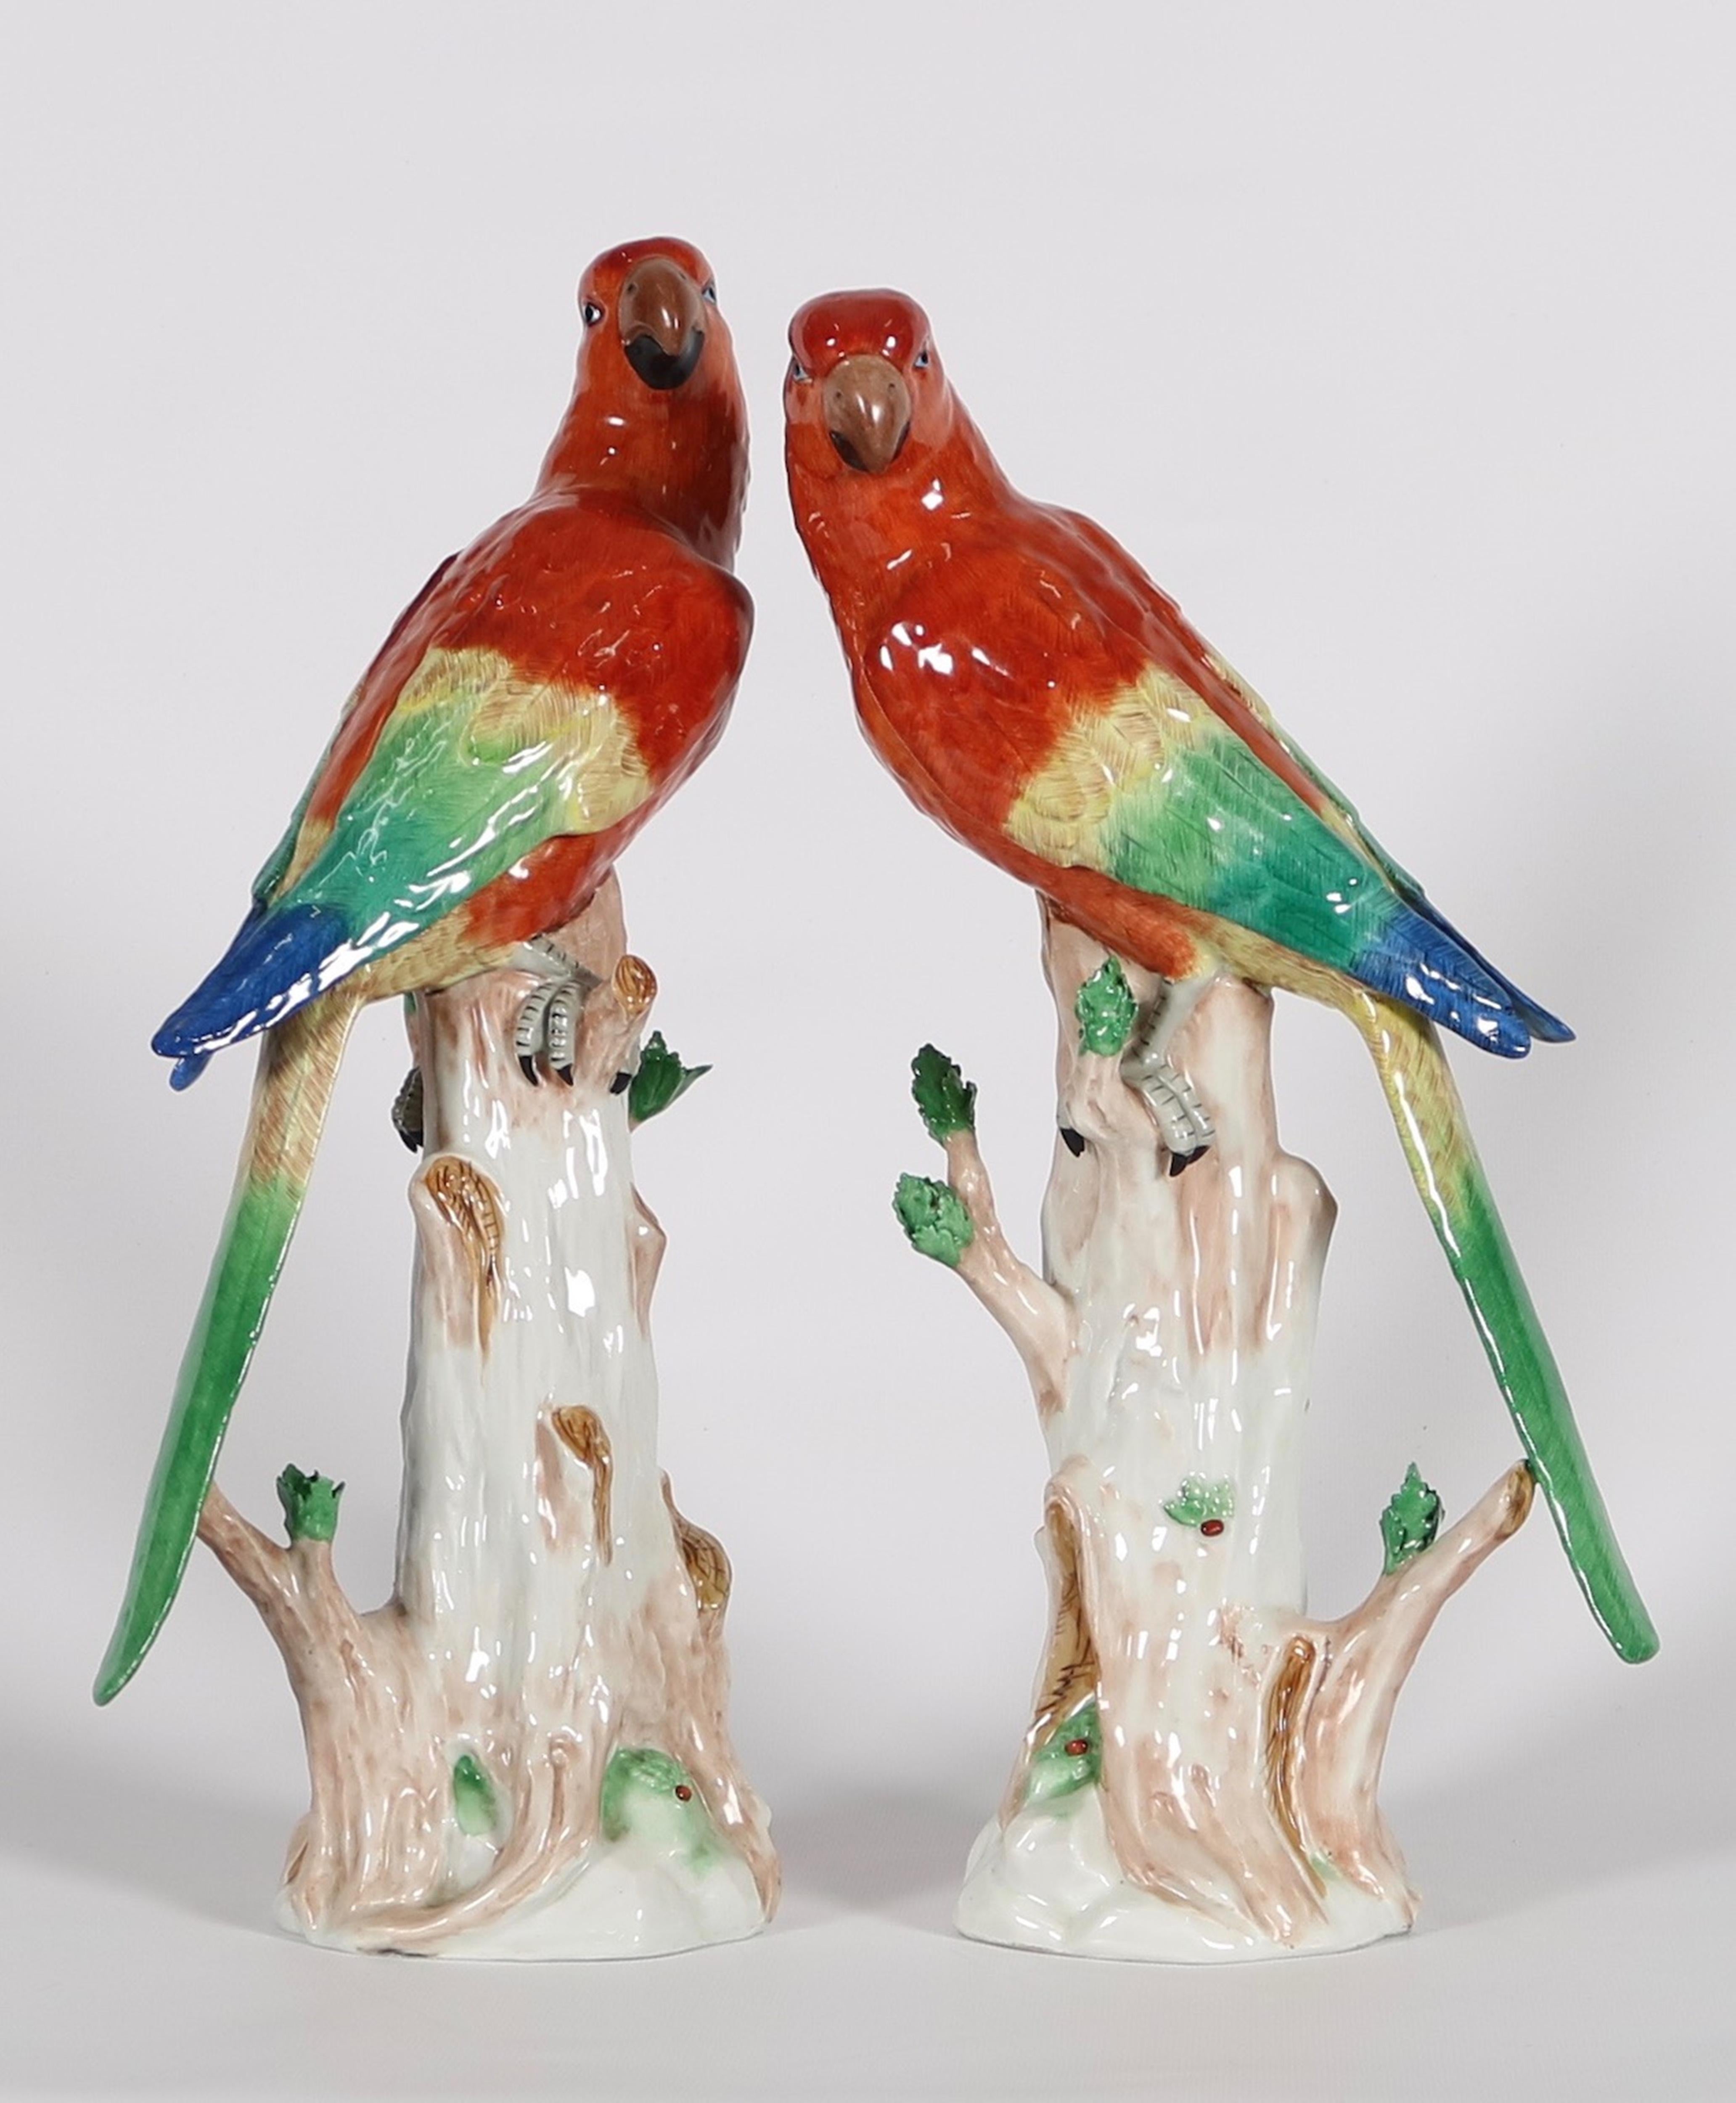 Dresden Porcelain macaw parrot sculptures. The pair are depicted seated on tree trunks with bright red plumage. Marked SP Dresden on the bottom of the base. Wear appropriate to age and use. The sculptures remain in excellent condition.